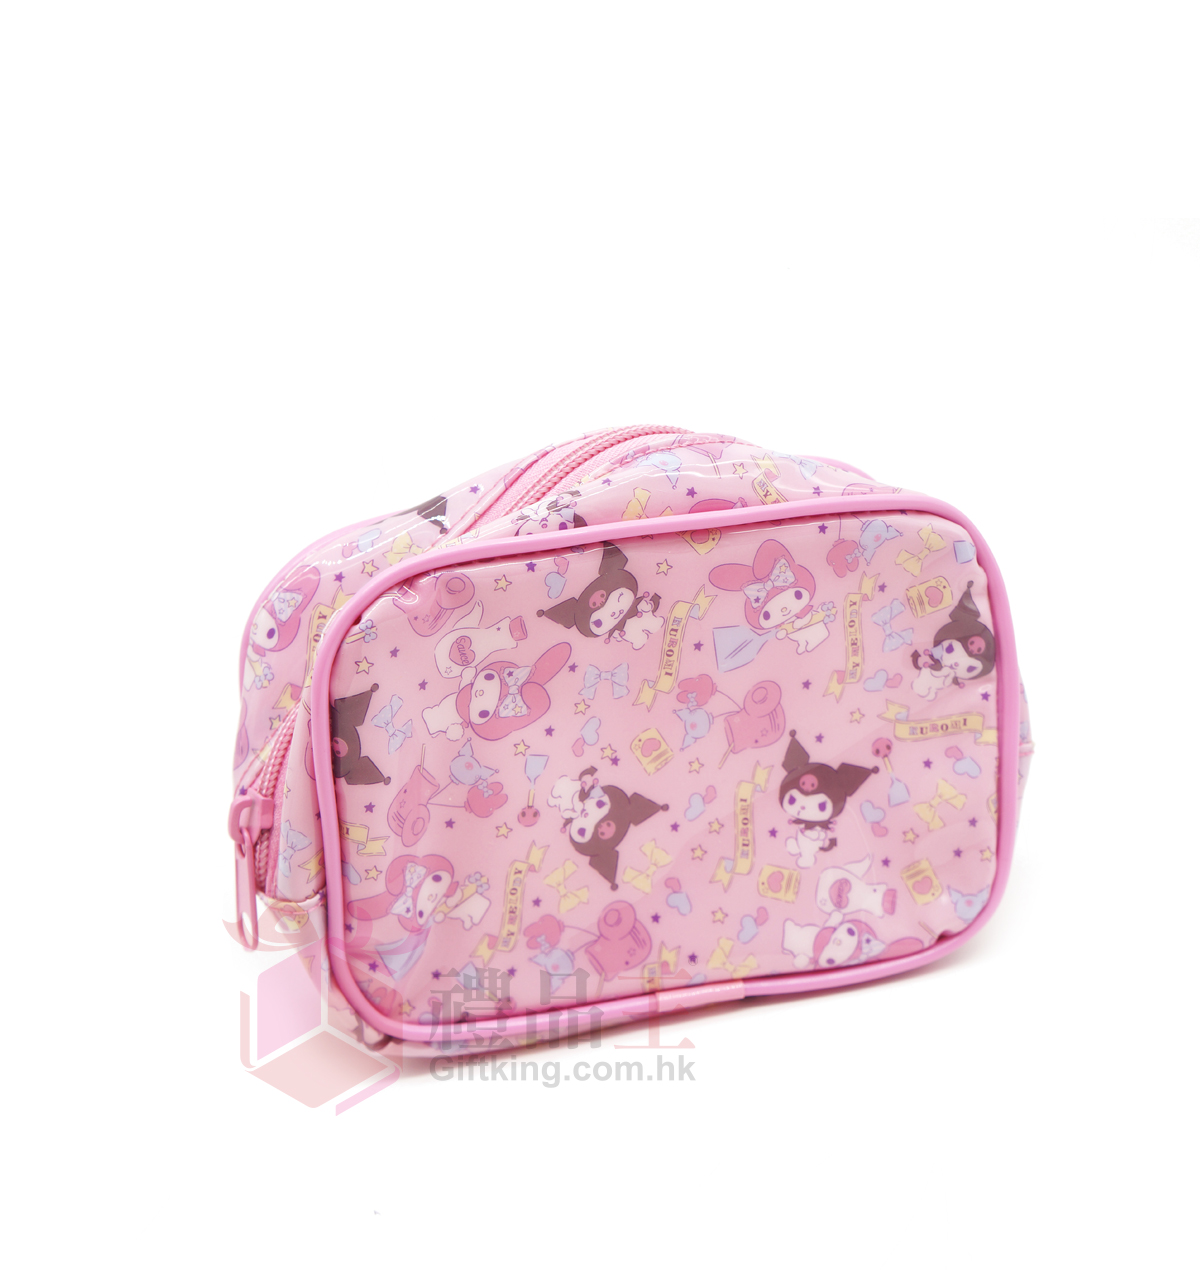 Mymelody cosmetic bag ( Travel gift)